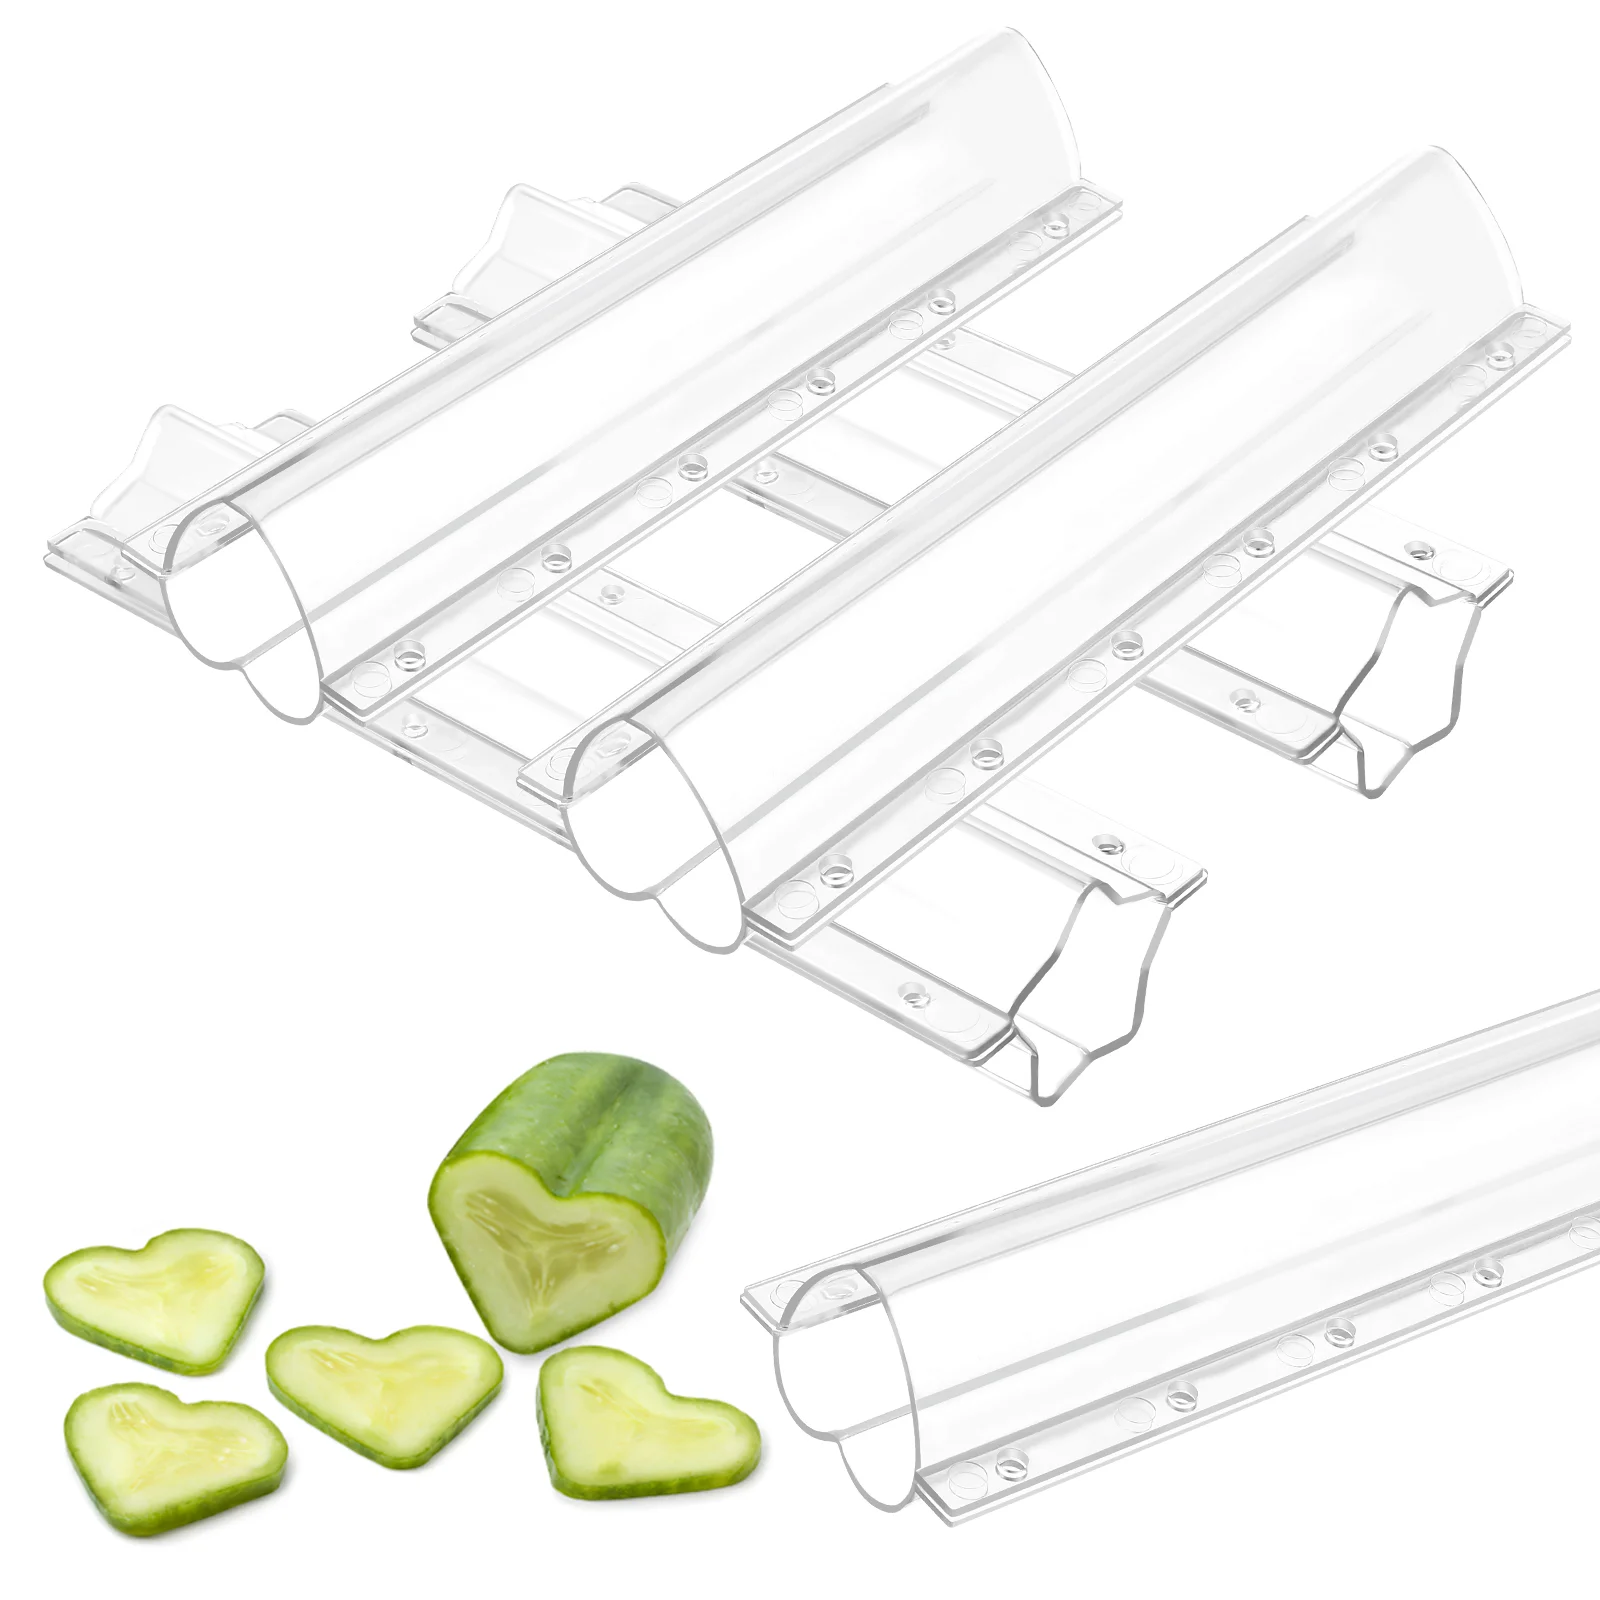 

4 Pcs Shaped Growth Mold Chocolate Molds Cucumber Fruit Vegetable Growing Tools Shaping Planting Accessories Plastic